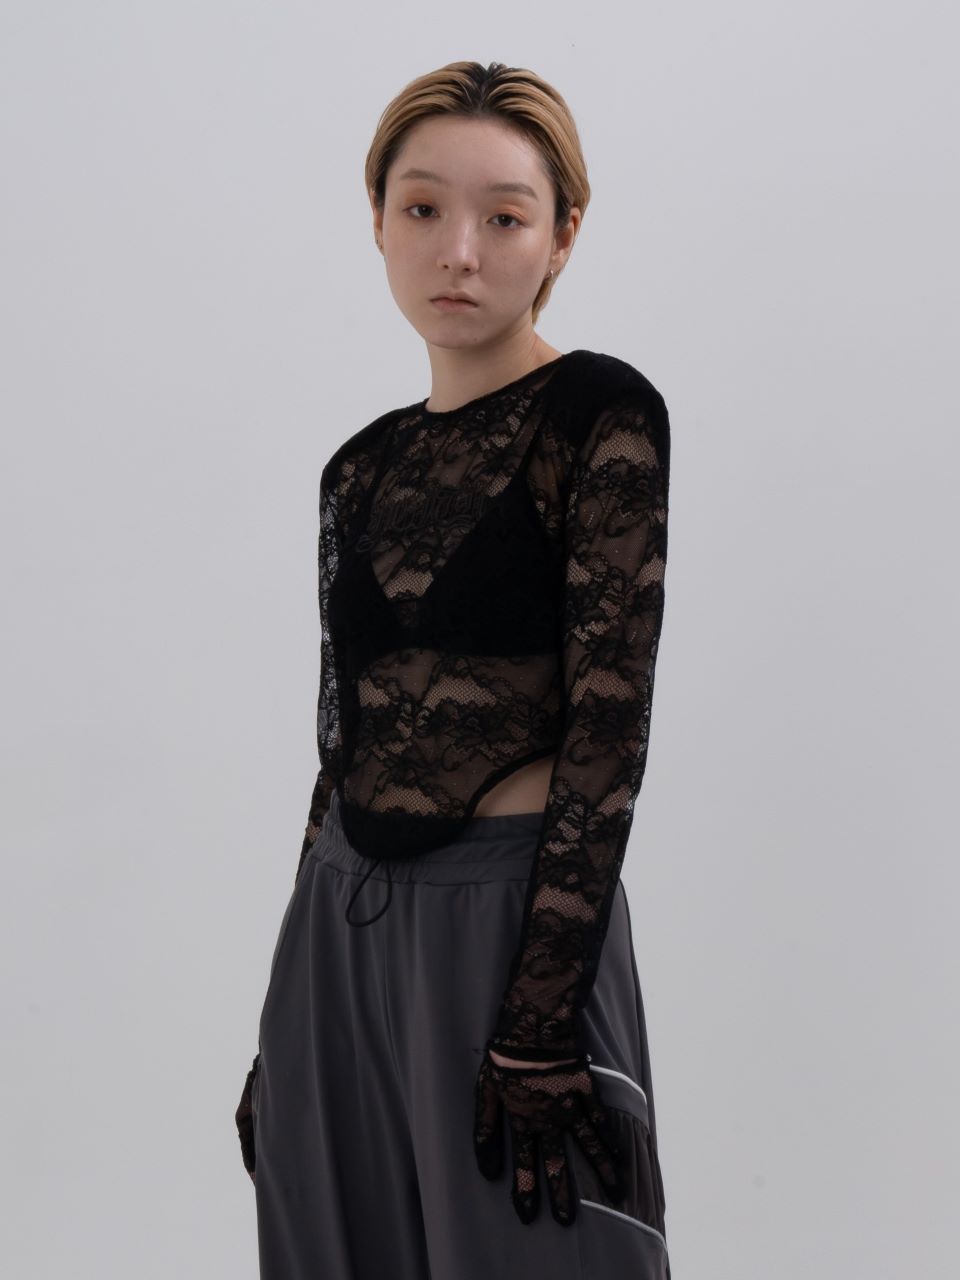 neith Lace Glove Top(Black)